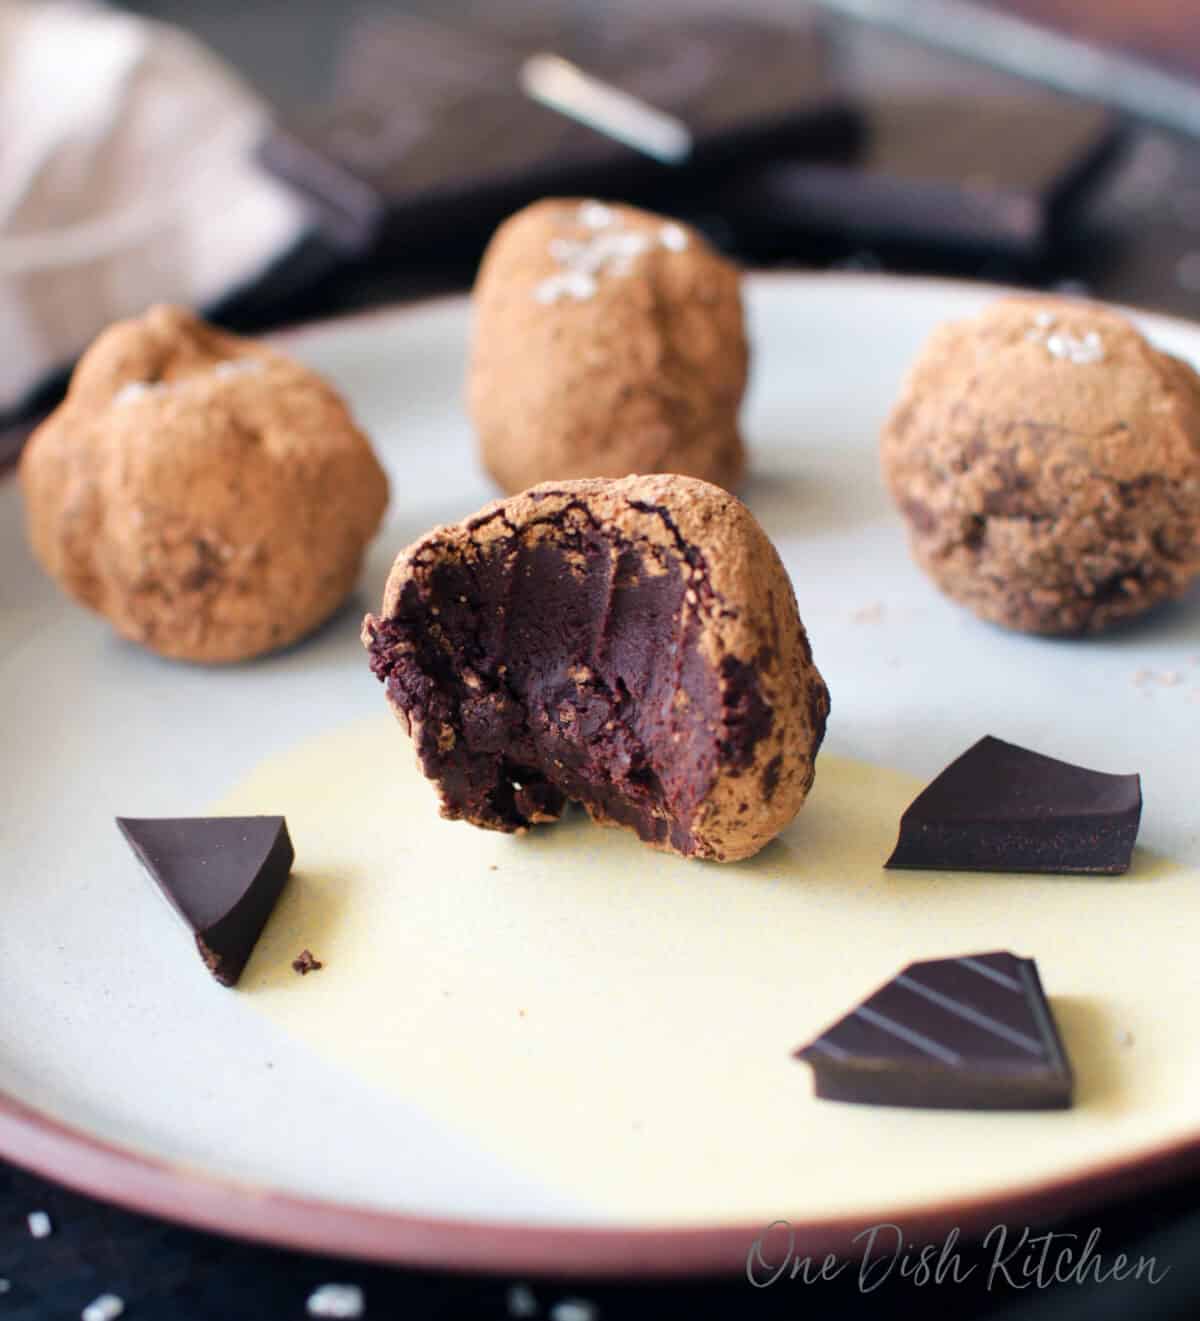 a partially eaten chocolate truffle on a plate next to three other truffles.